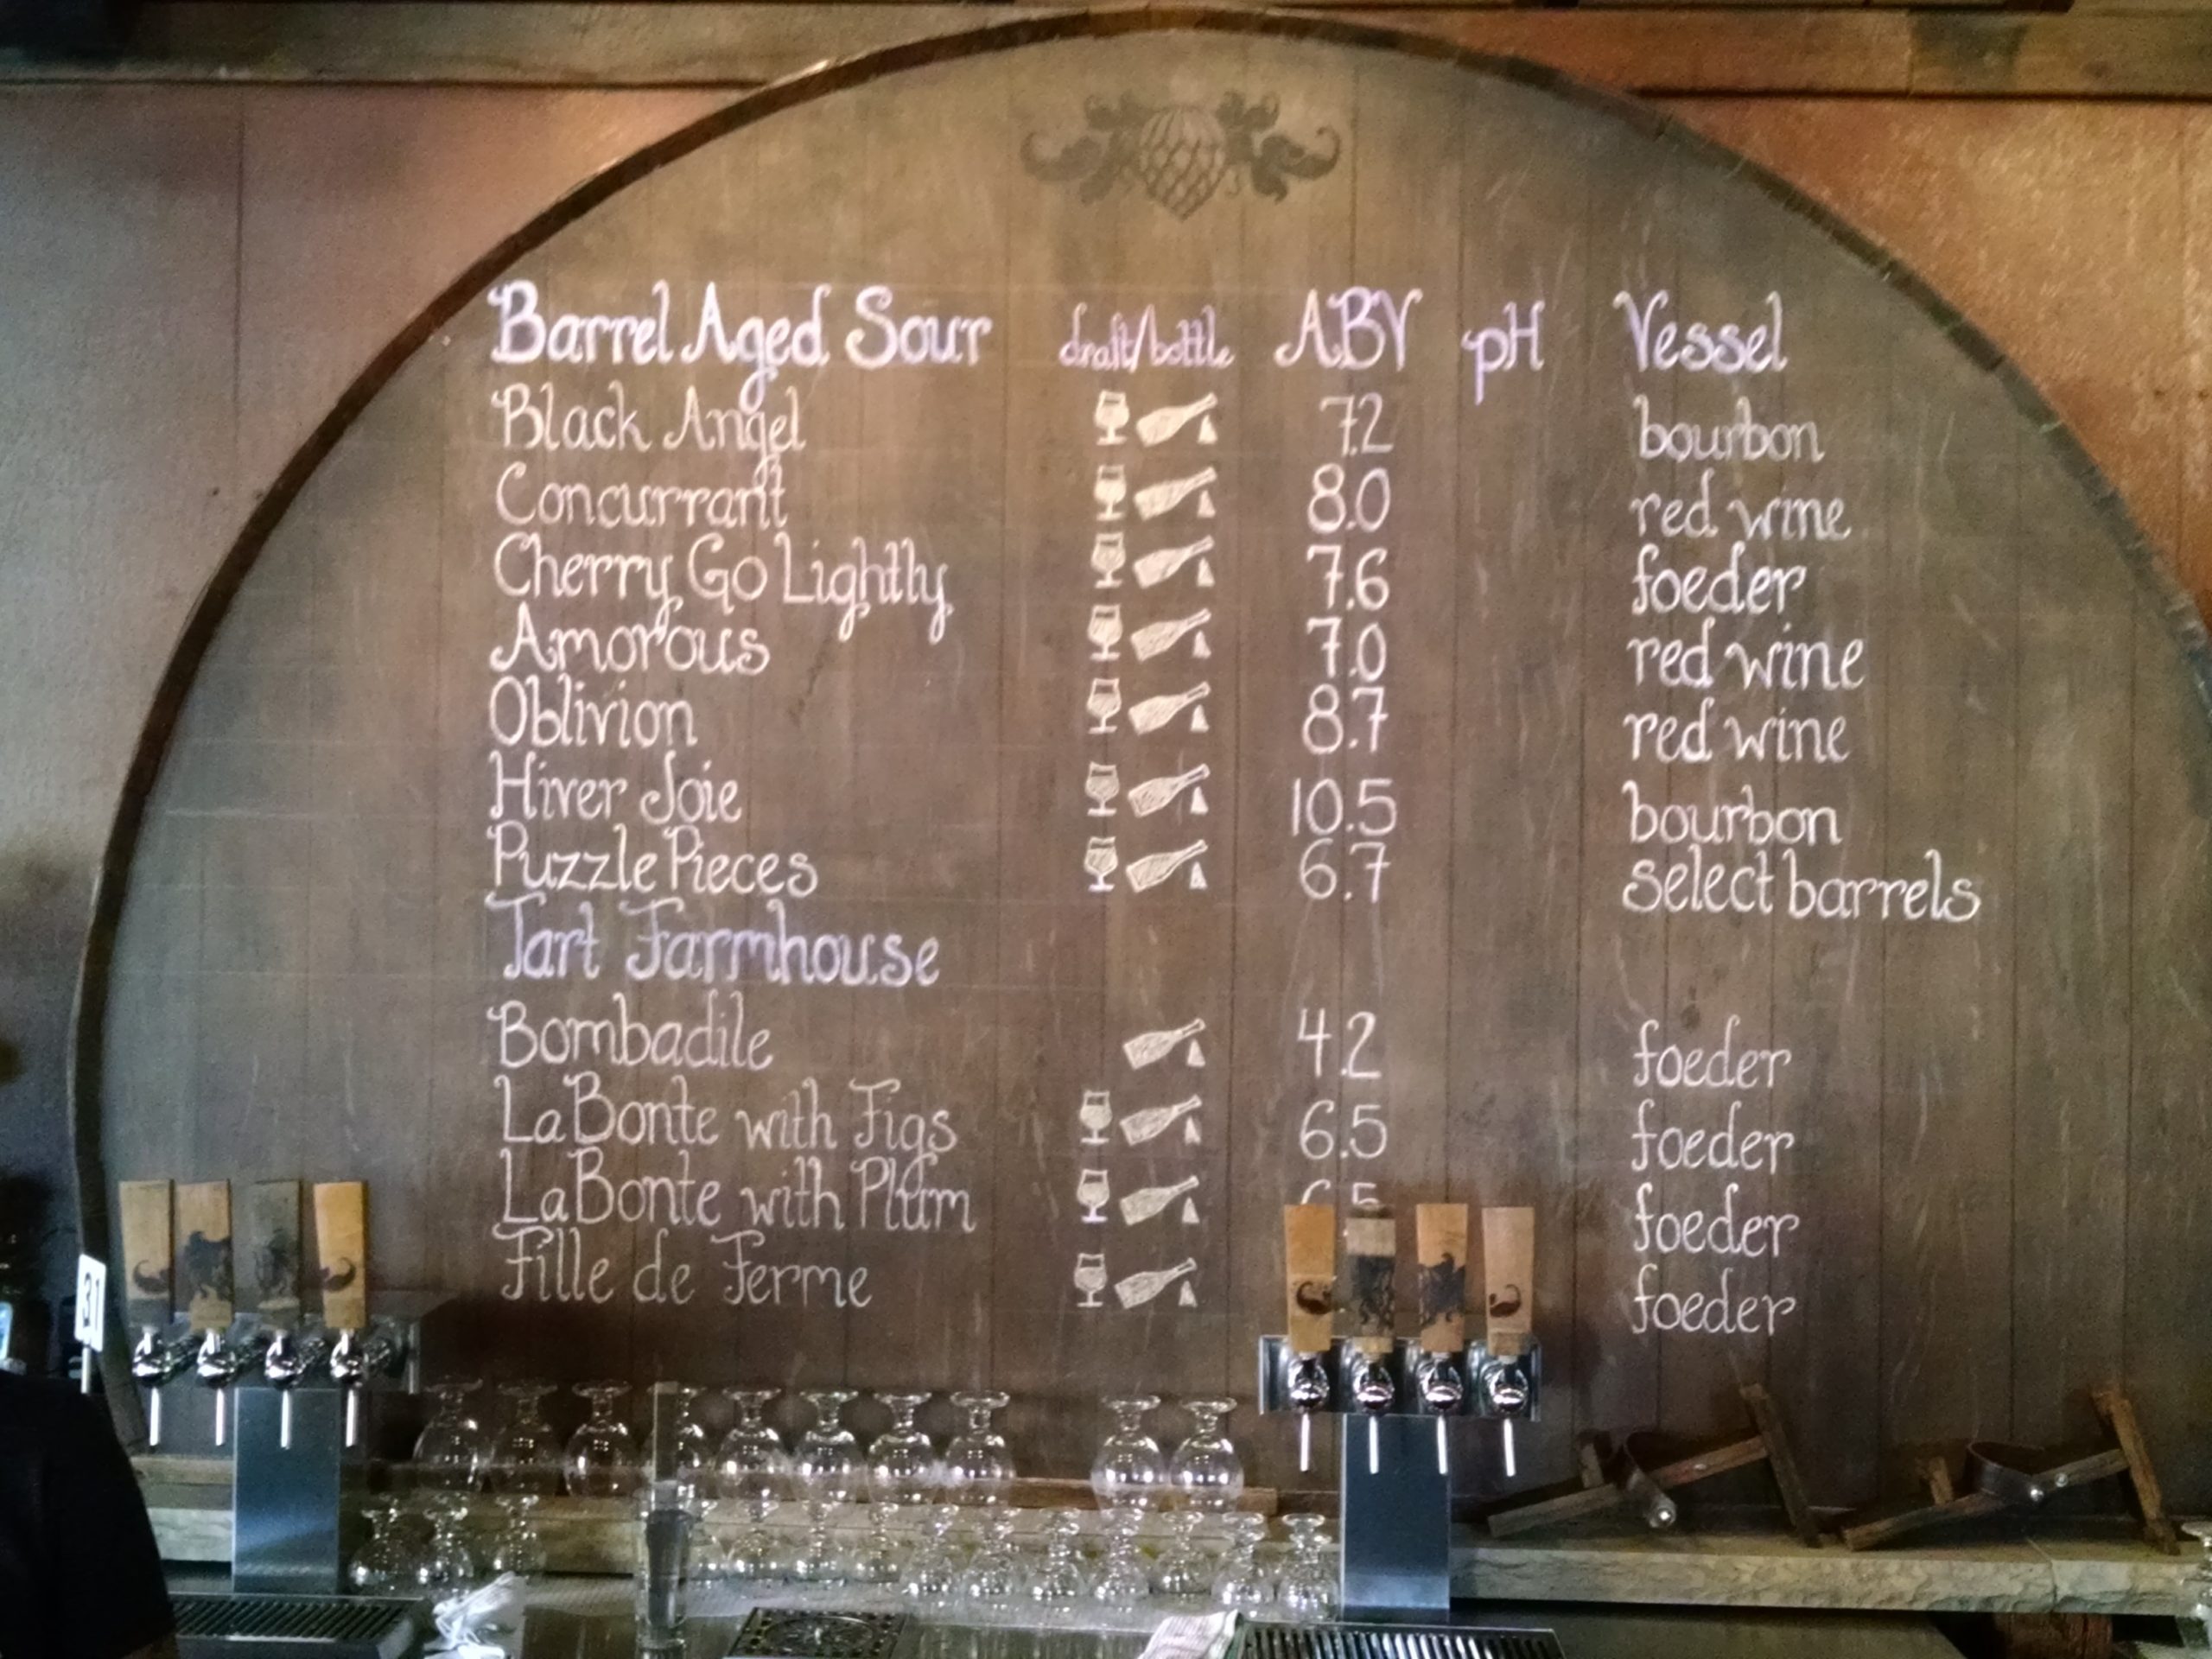 Some of the beers on tap at the Wicked Weed Funkatorium